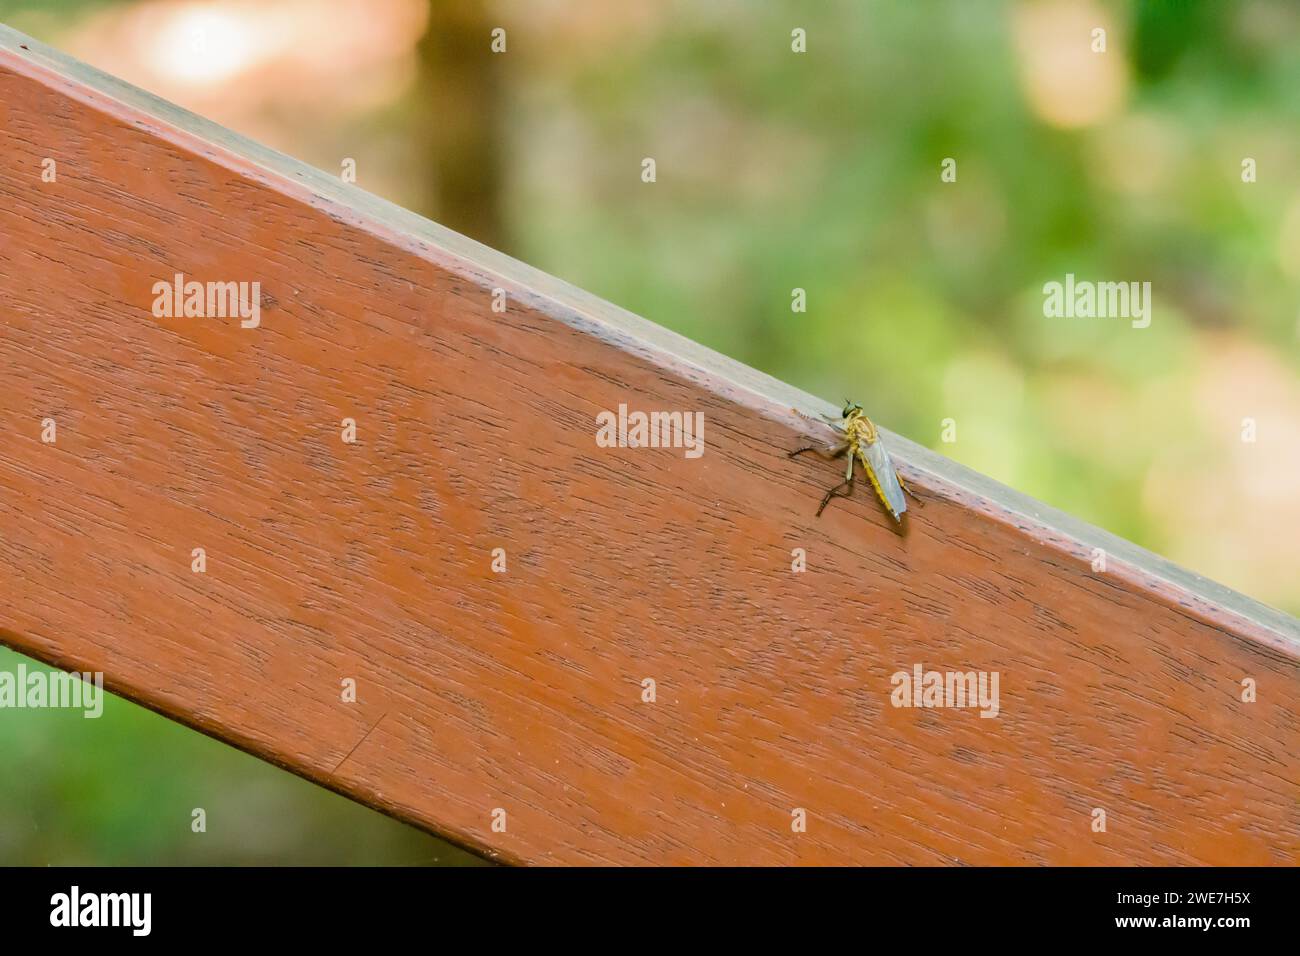 Closeup of Long-legged fly, Dolichopodidalarge flying insect on a brown wooden handrail with soft blurred background Stock Photo